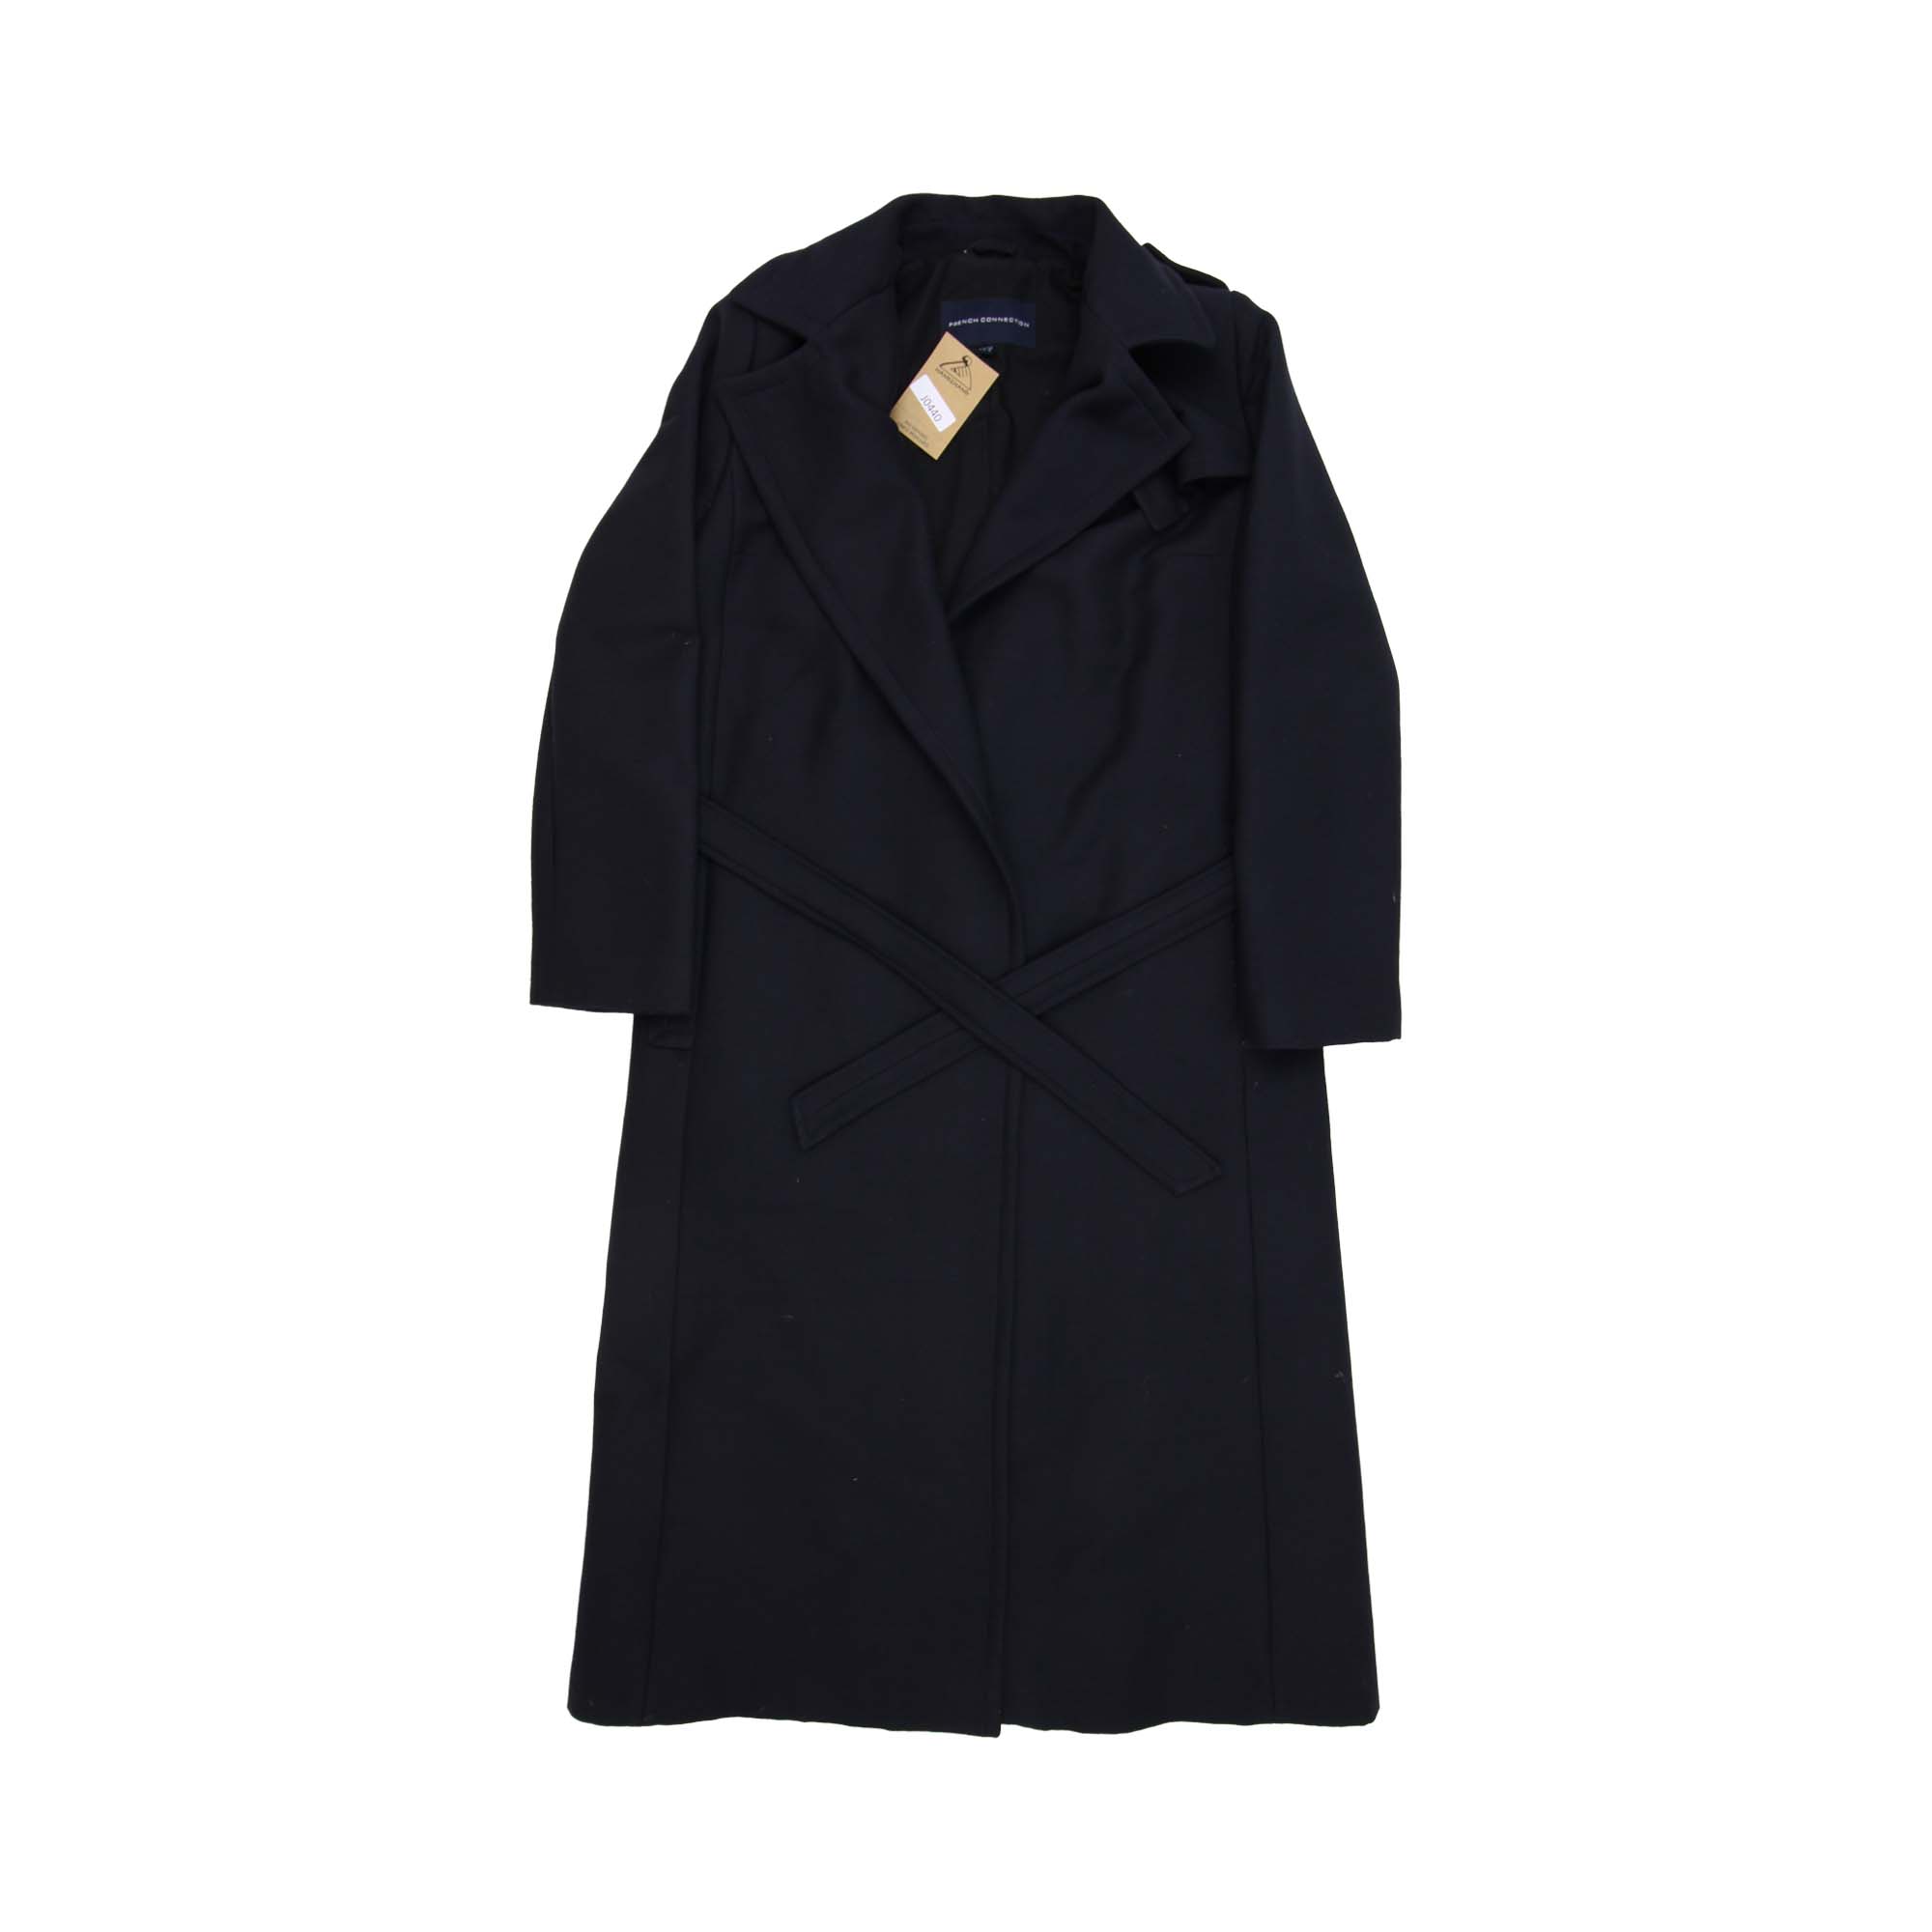 French Connection Trenchcoat - Women's L 